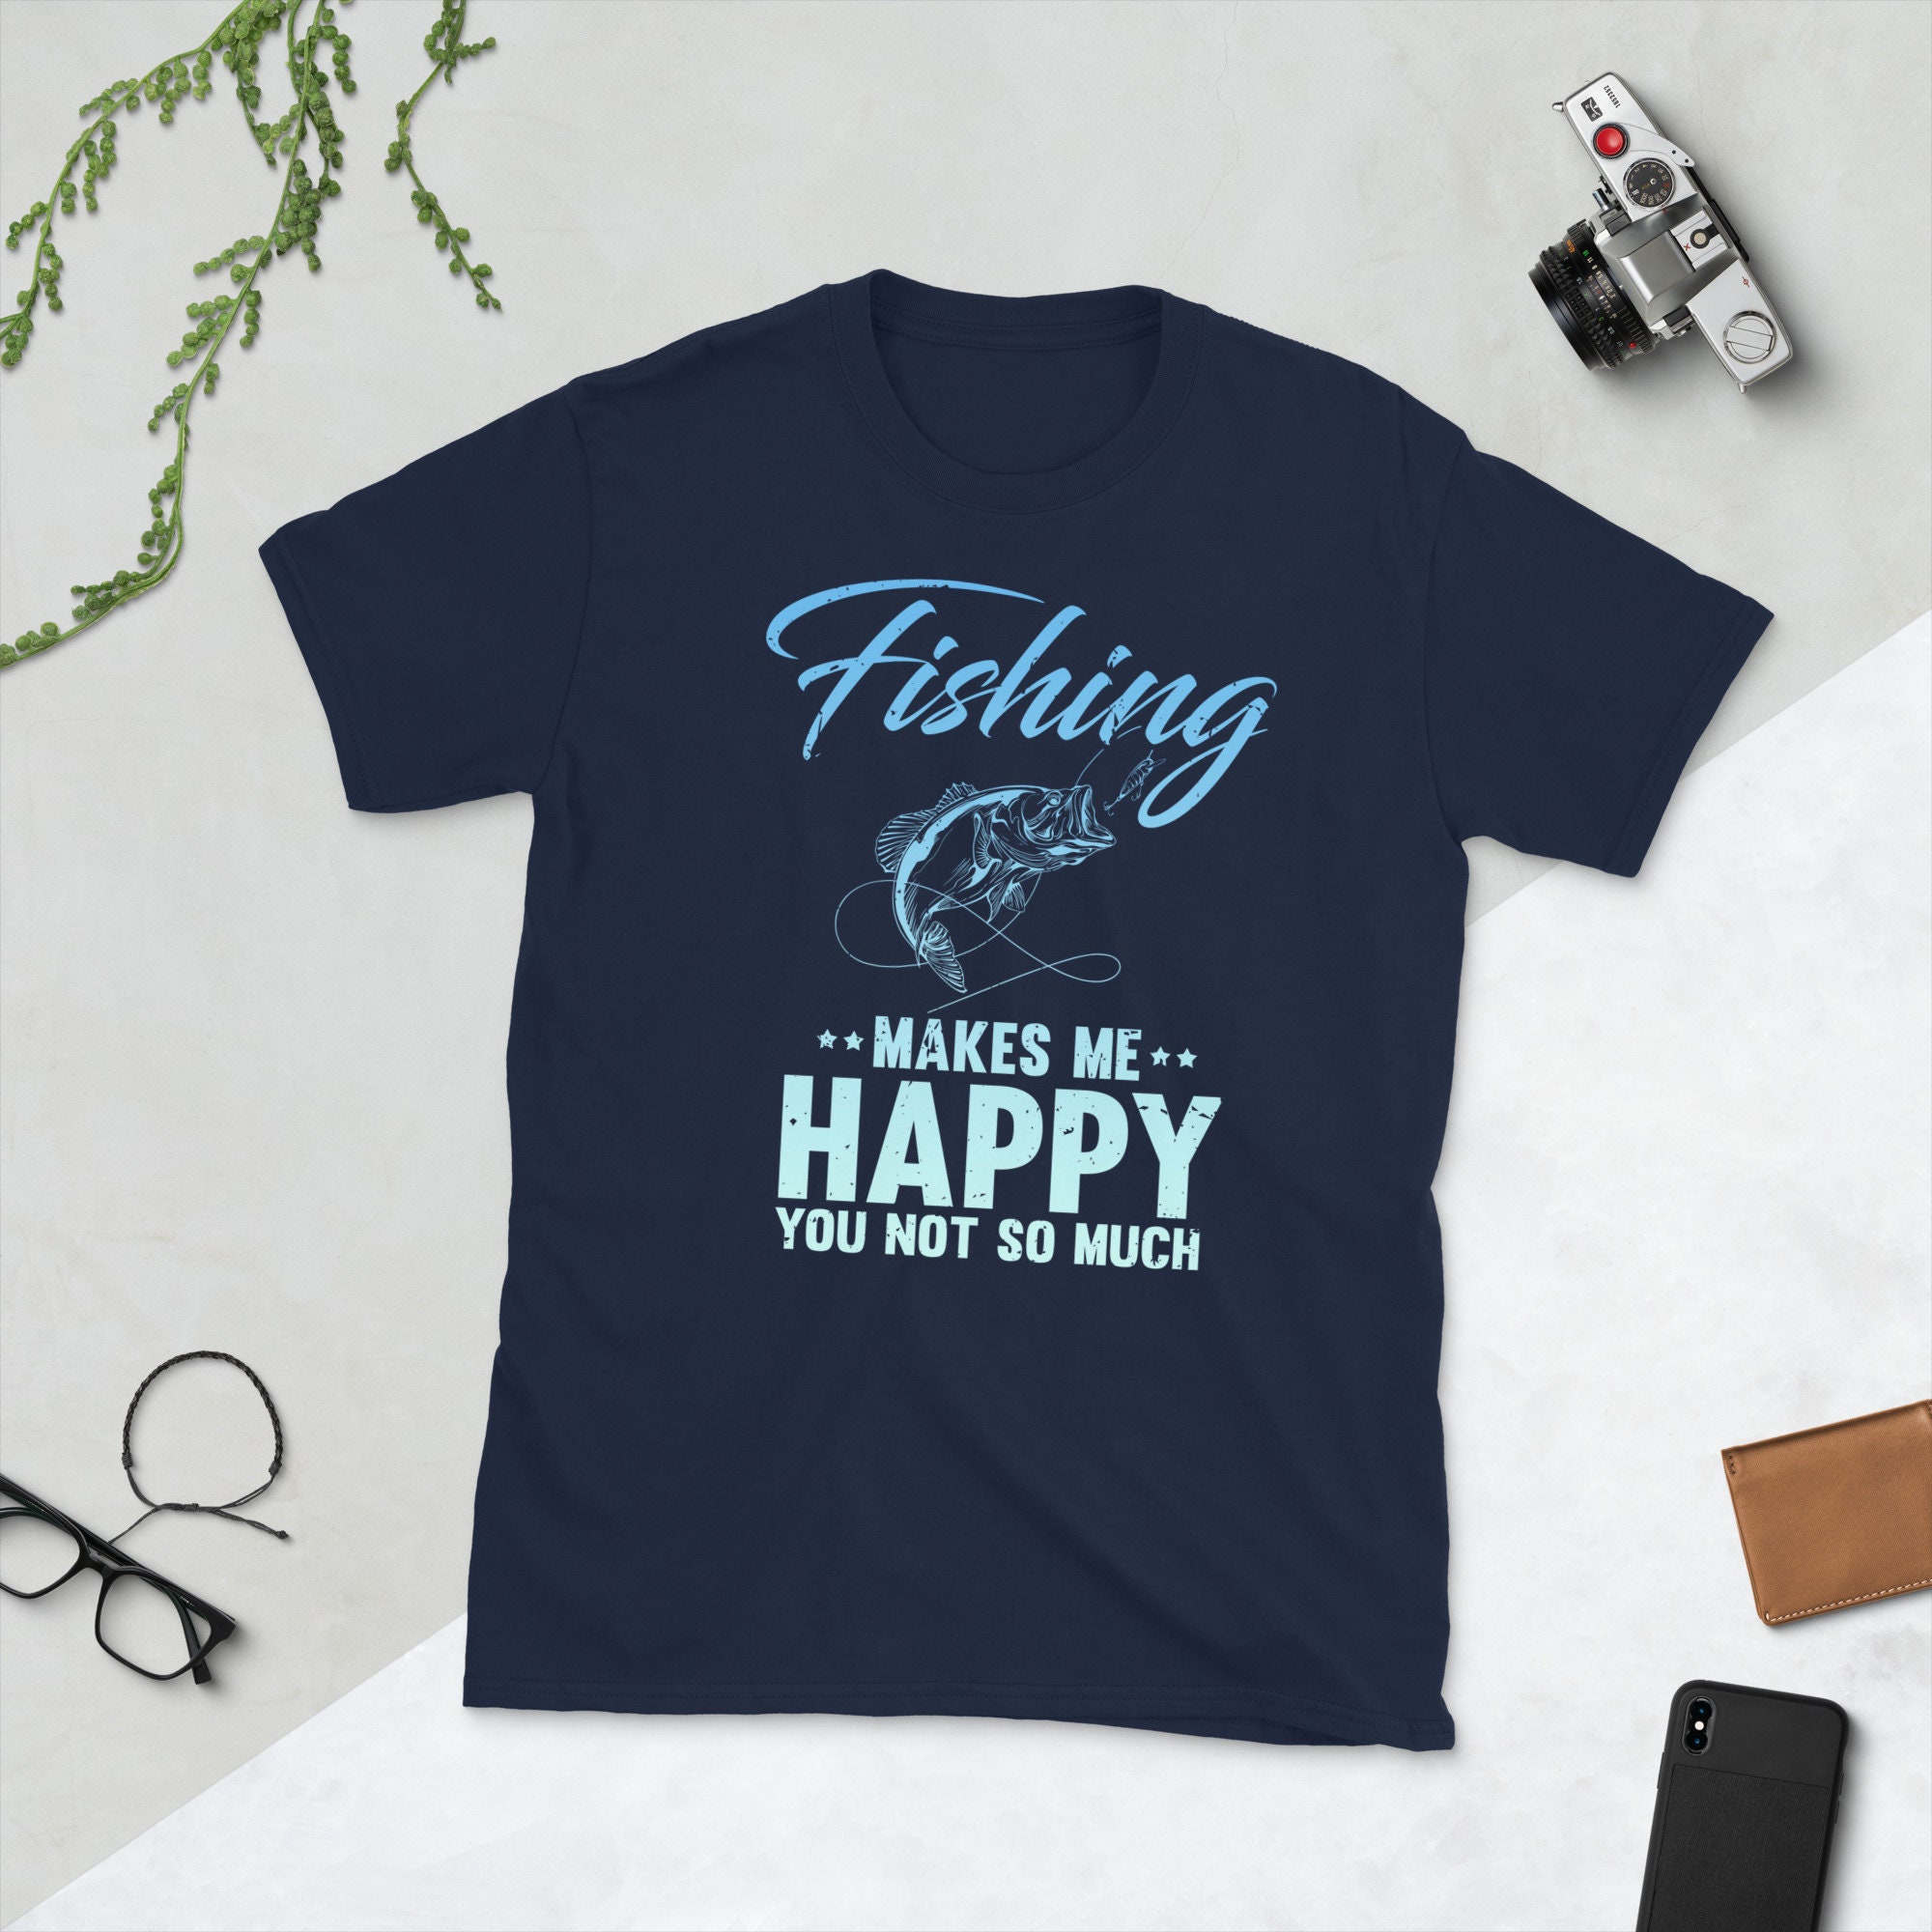 Fishing Makes Me Happy You Not so Much Apparel for Fisherman